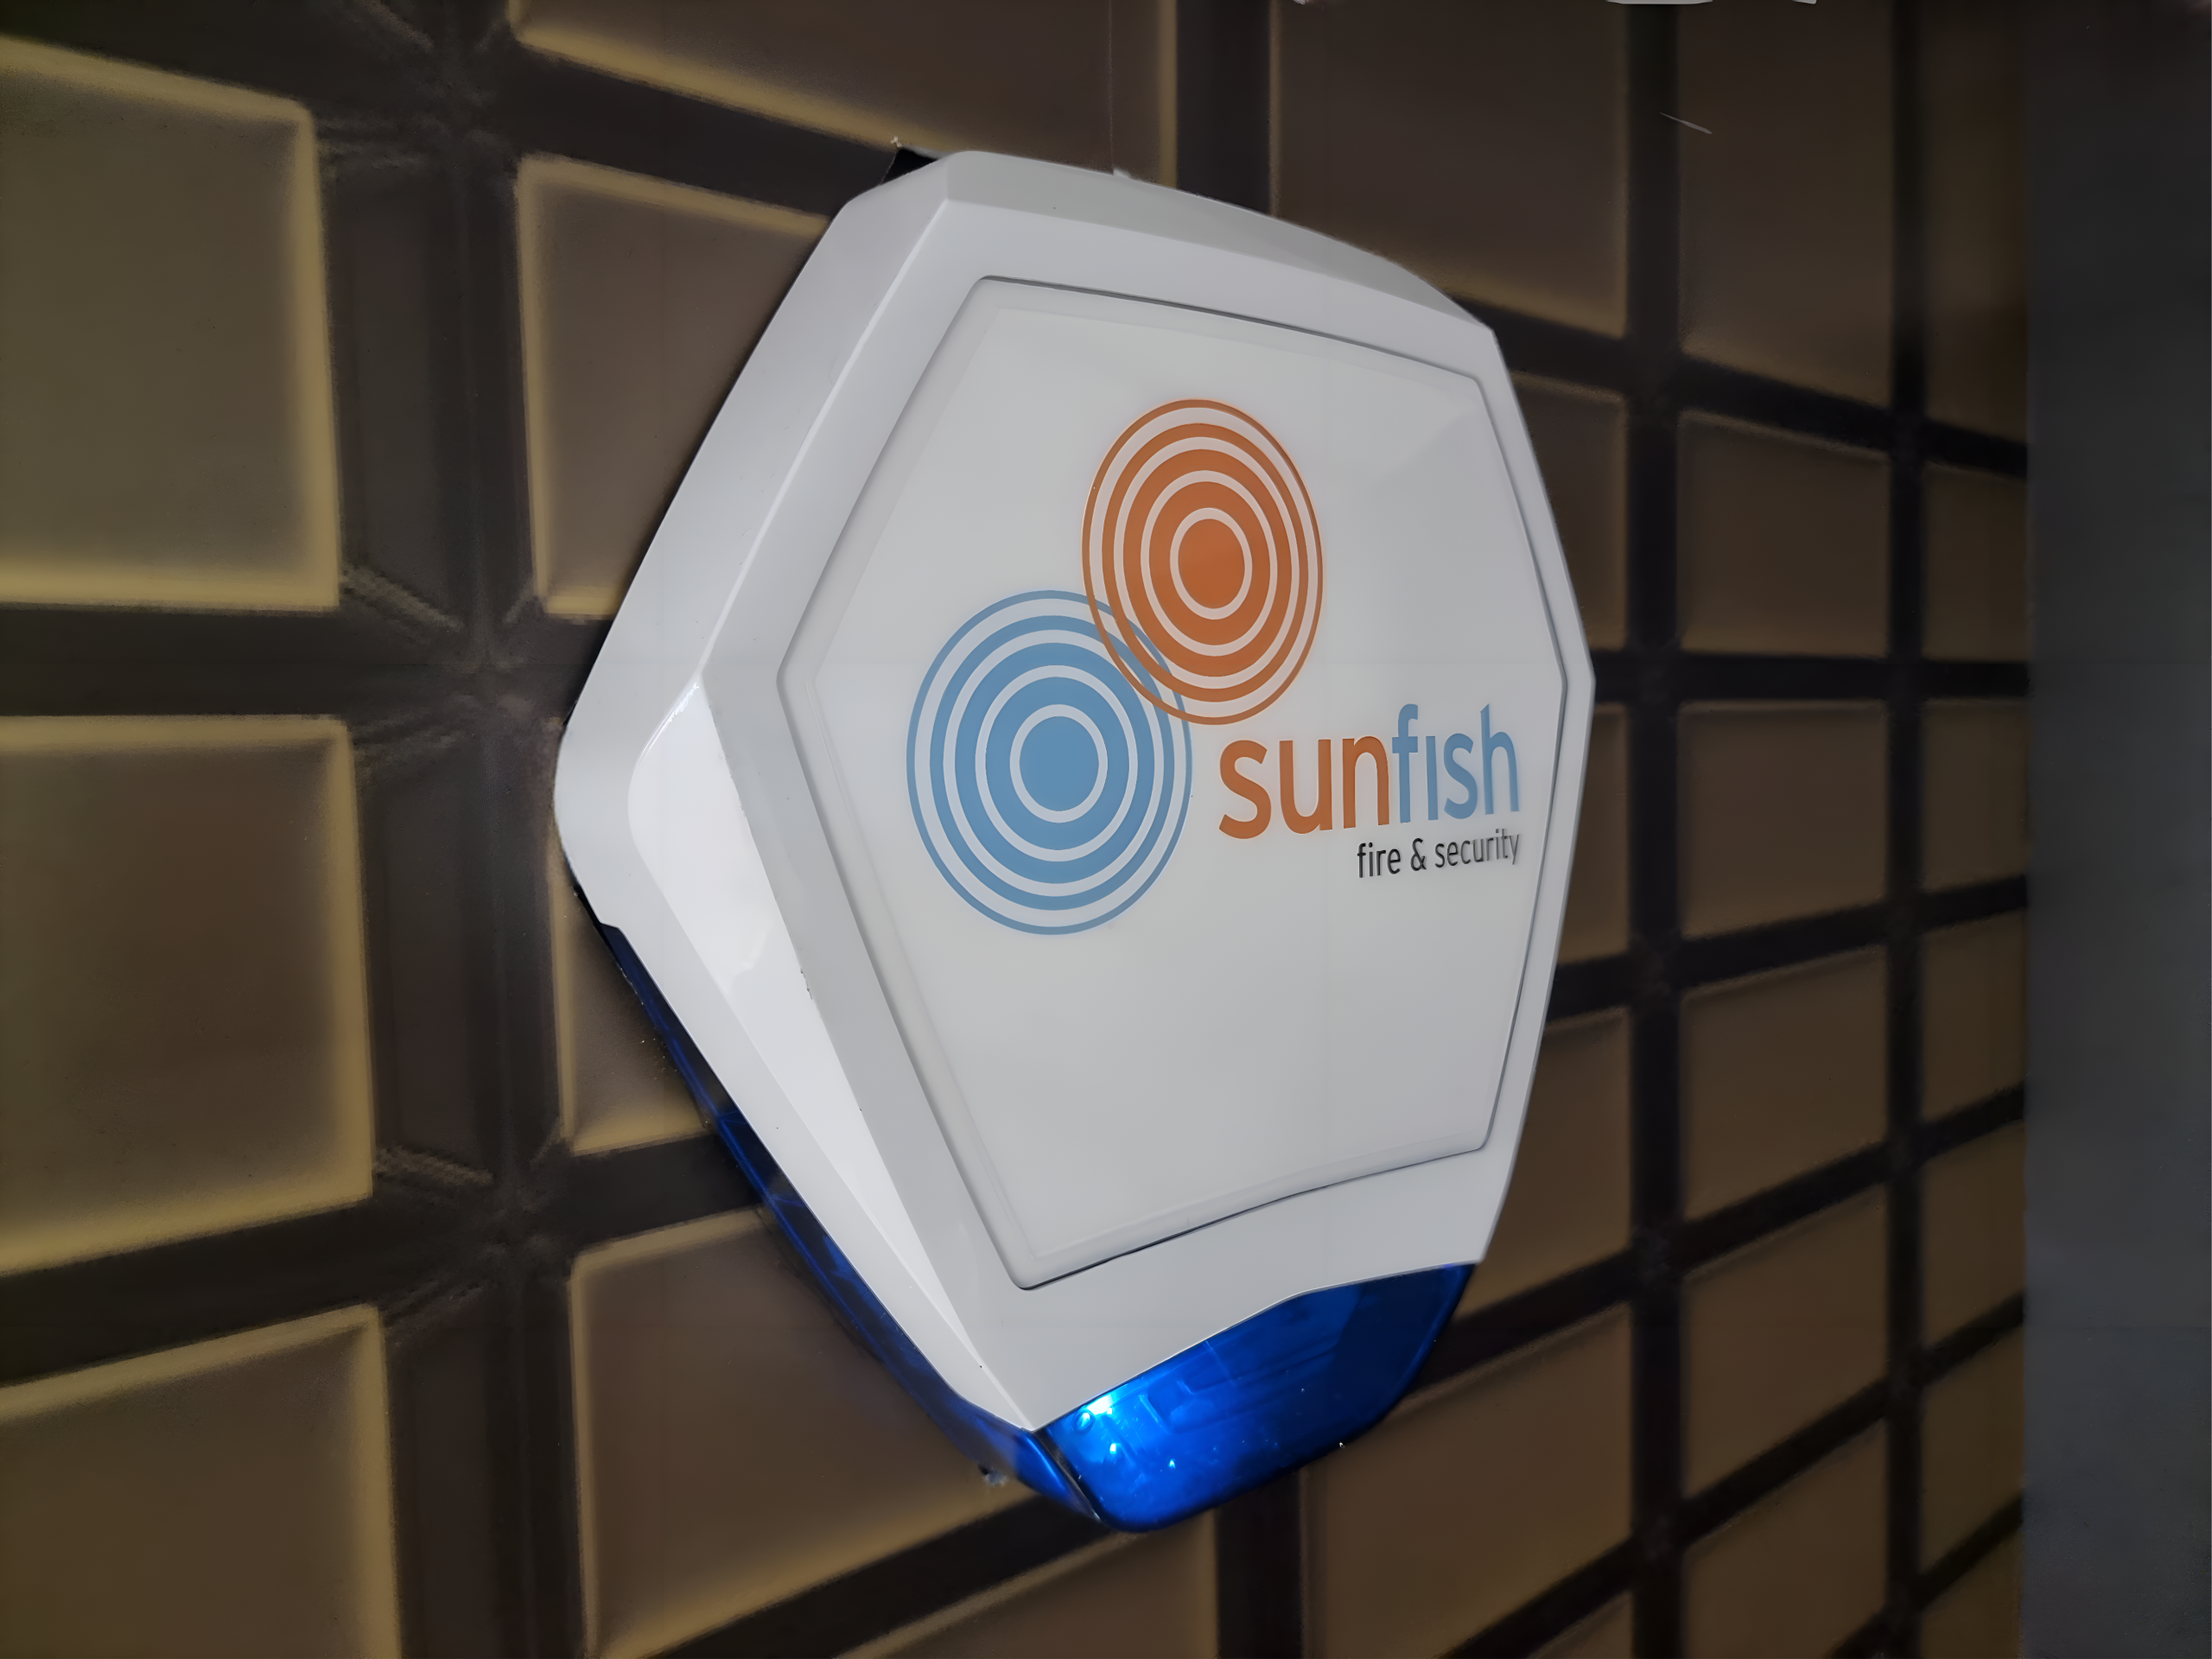 Sunfish services fire and security